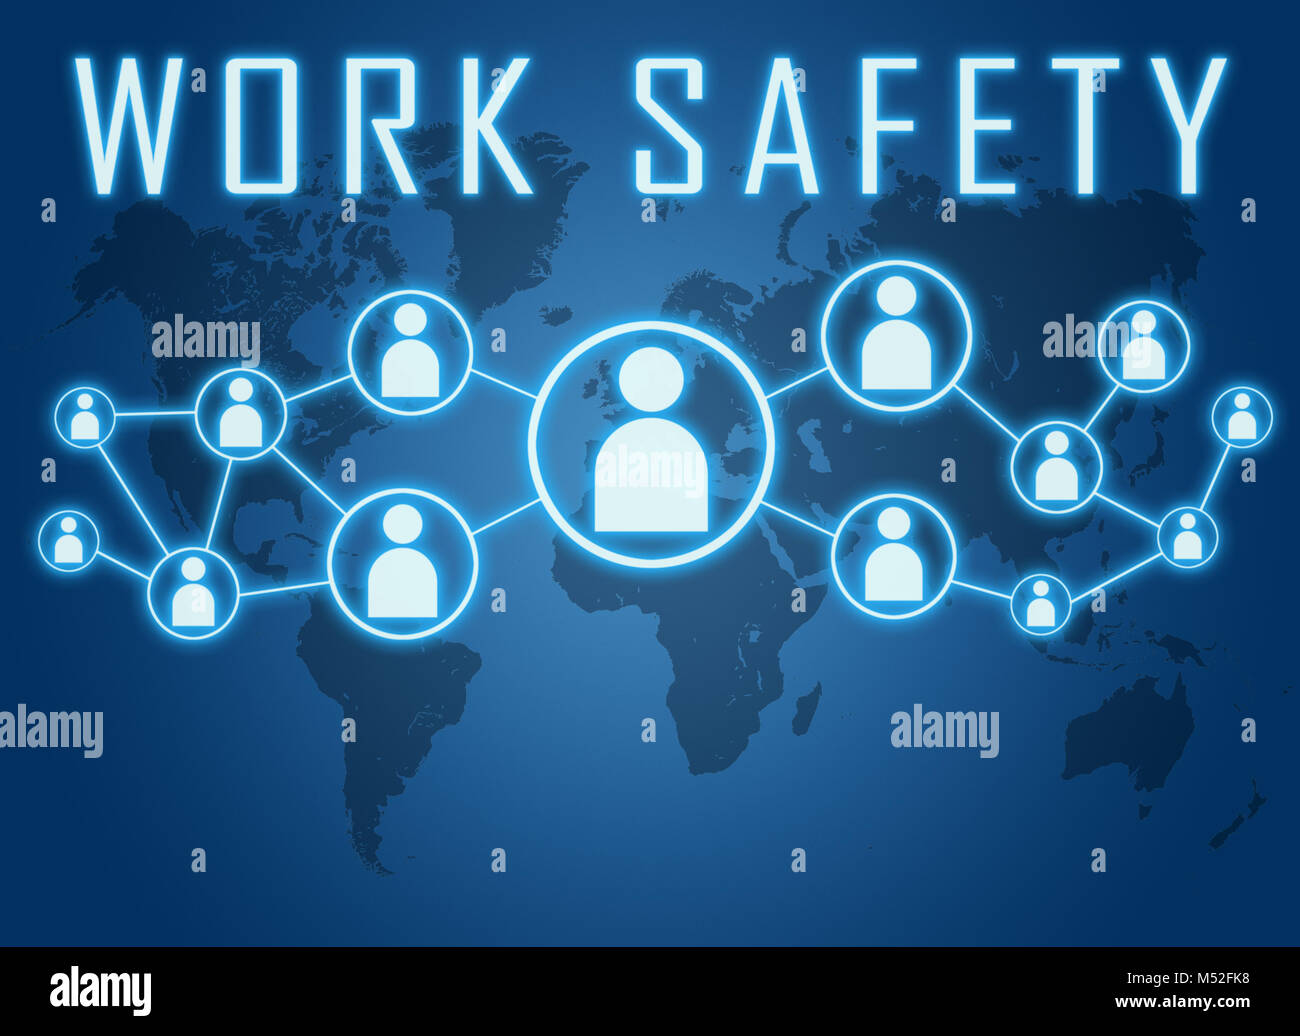 Work safety text concept Stock Photo